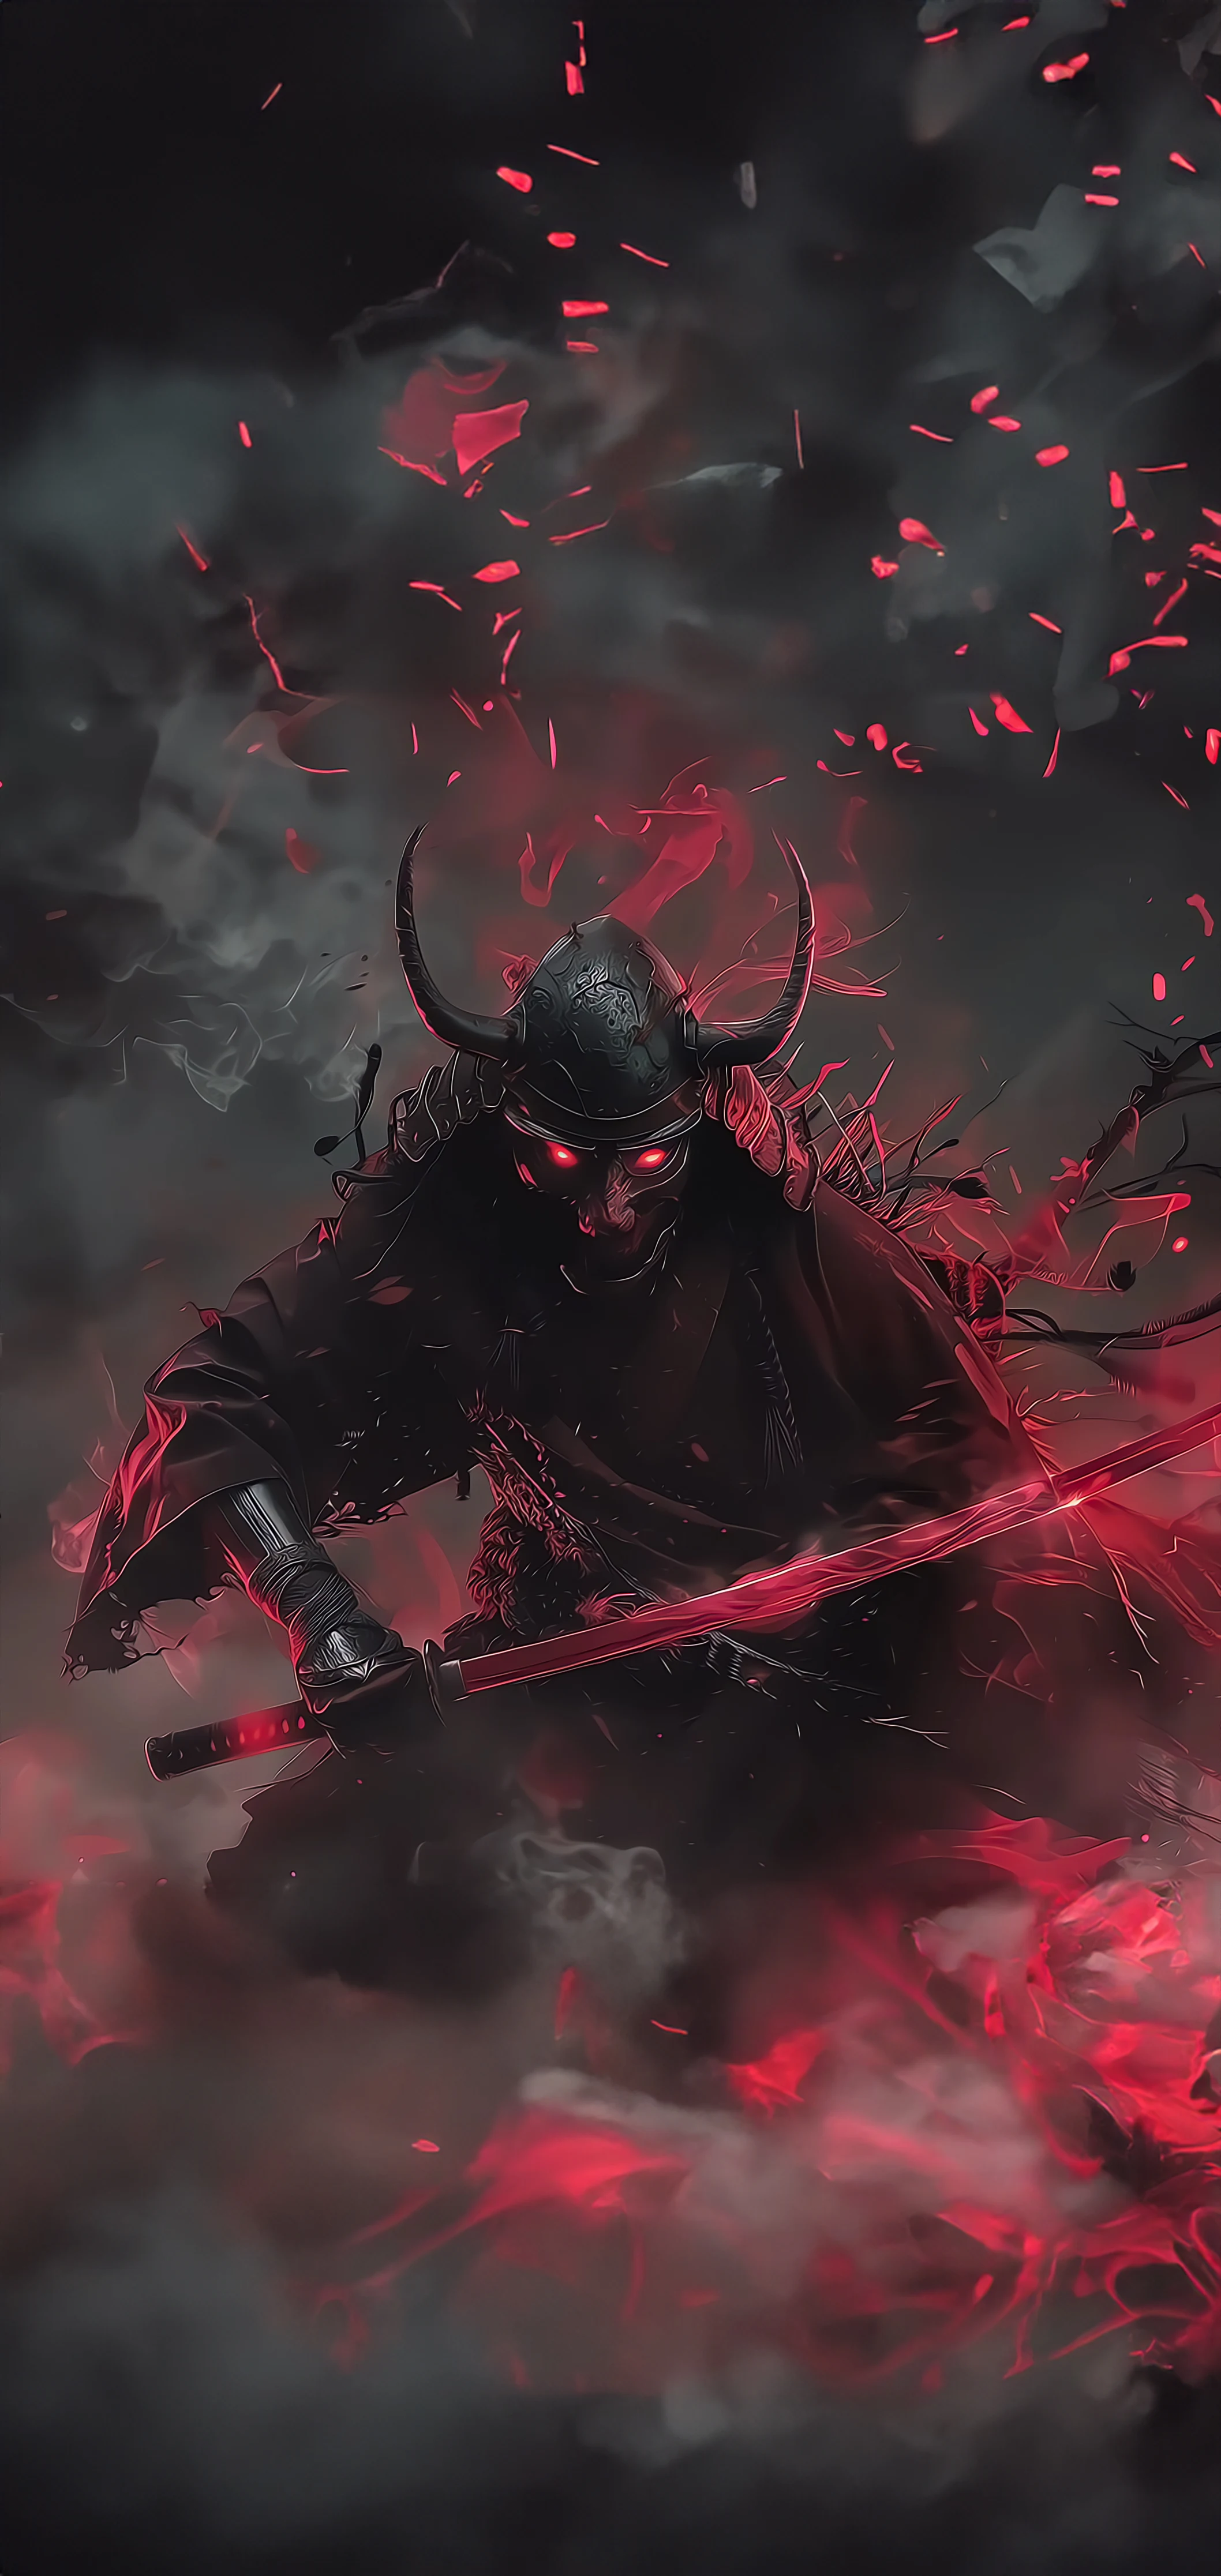 A foreboding samurai with glowing eyes, wielding a katana, surrounded by a whirl
of crimson petals and dark mist
